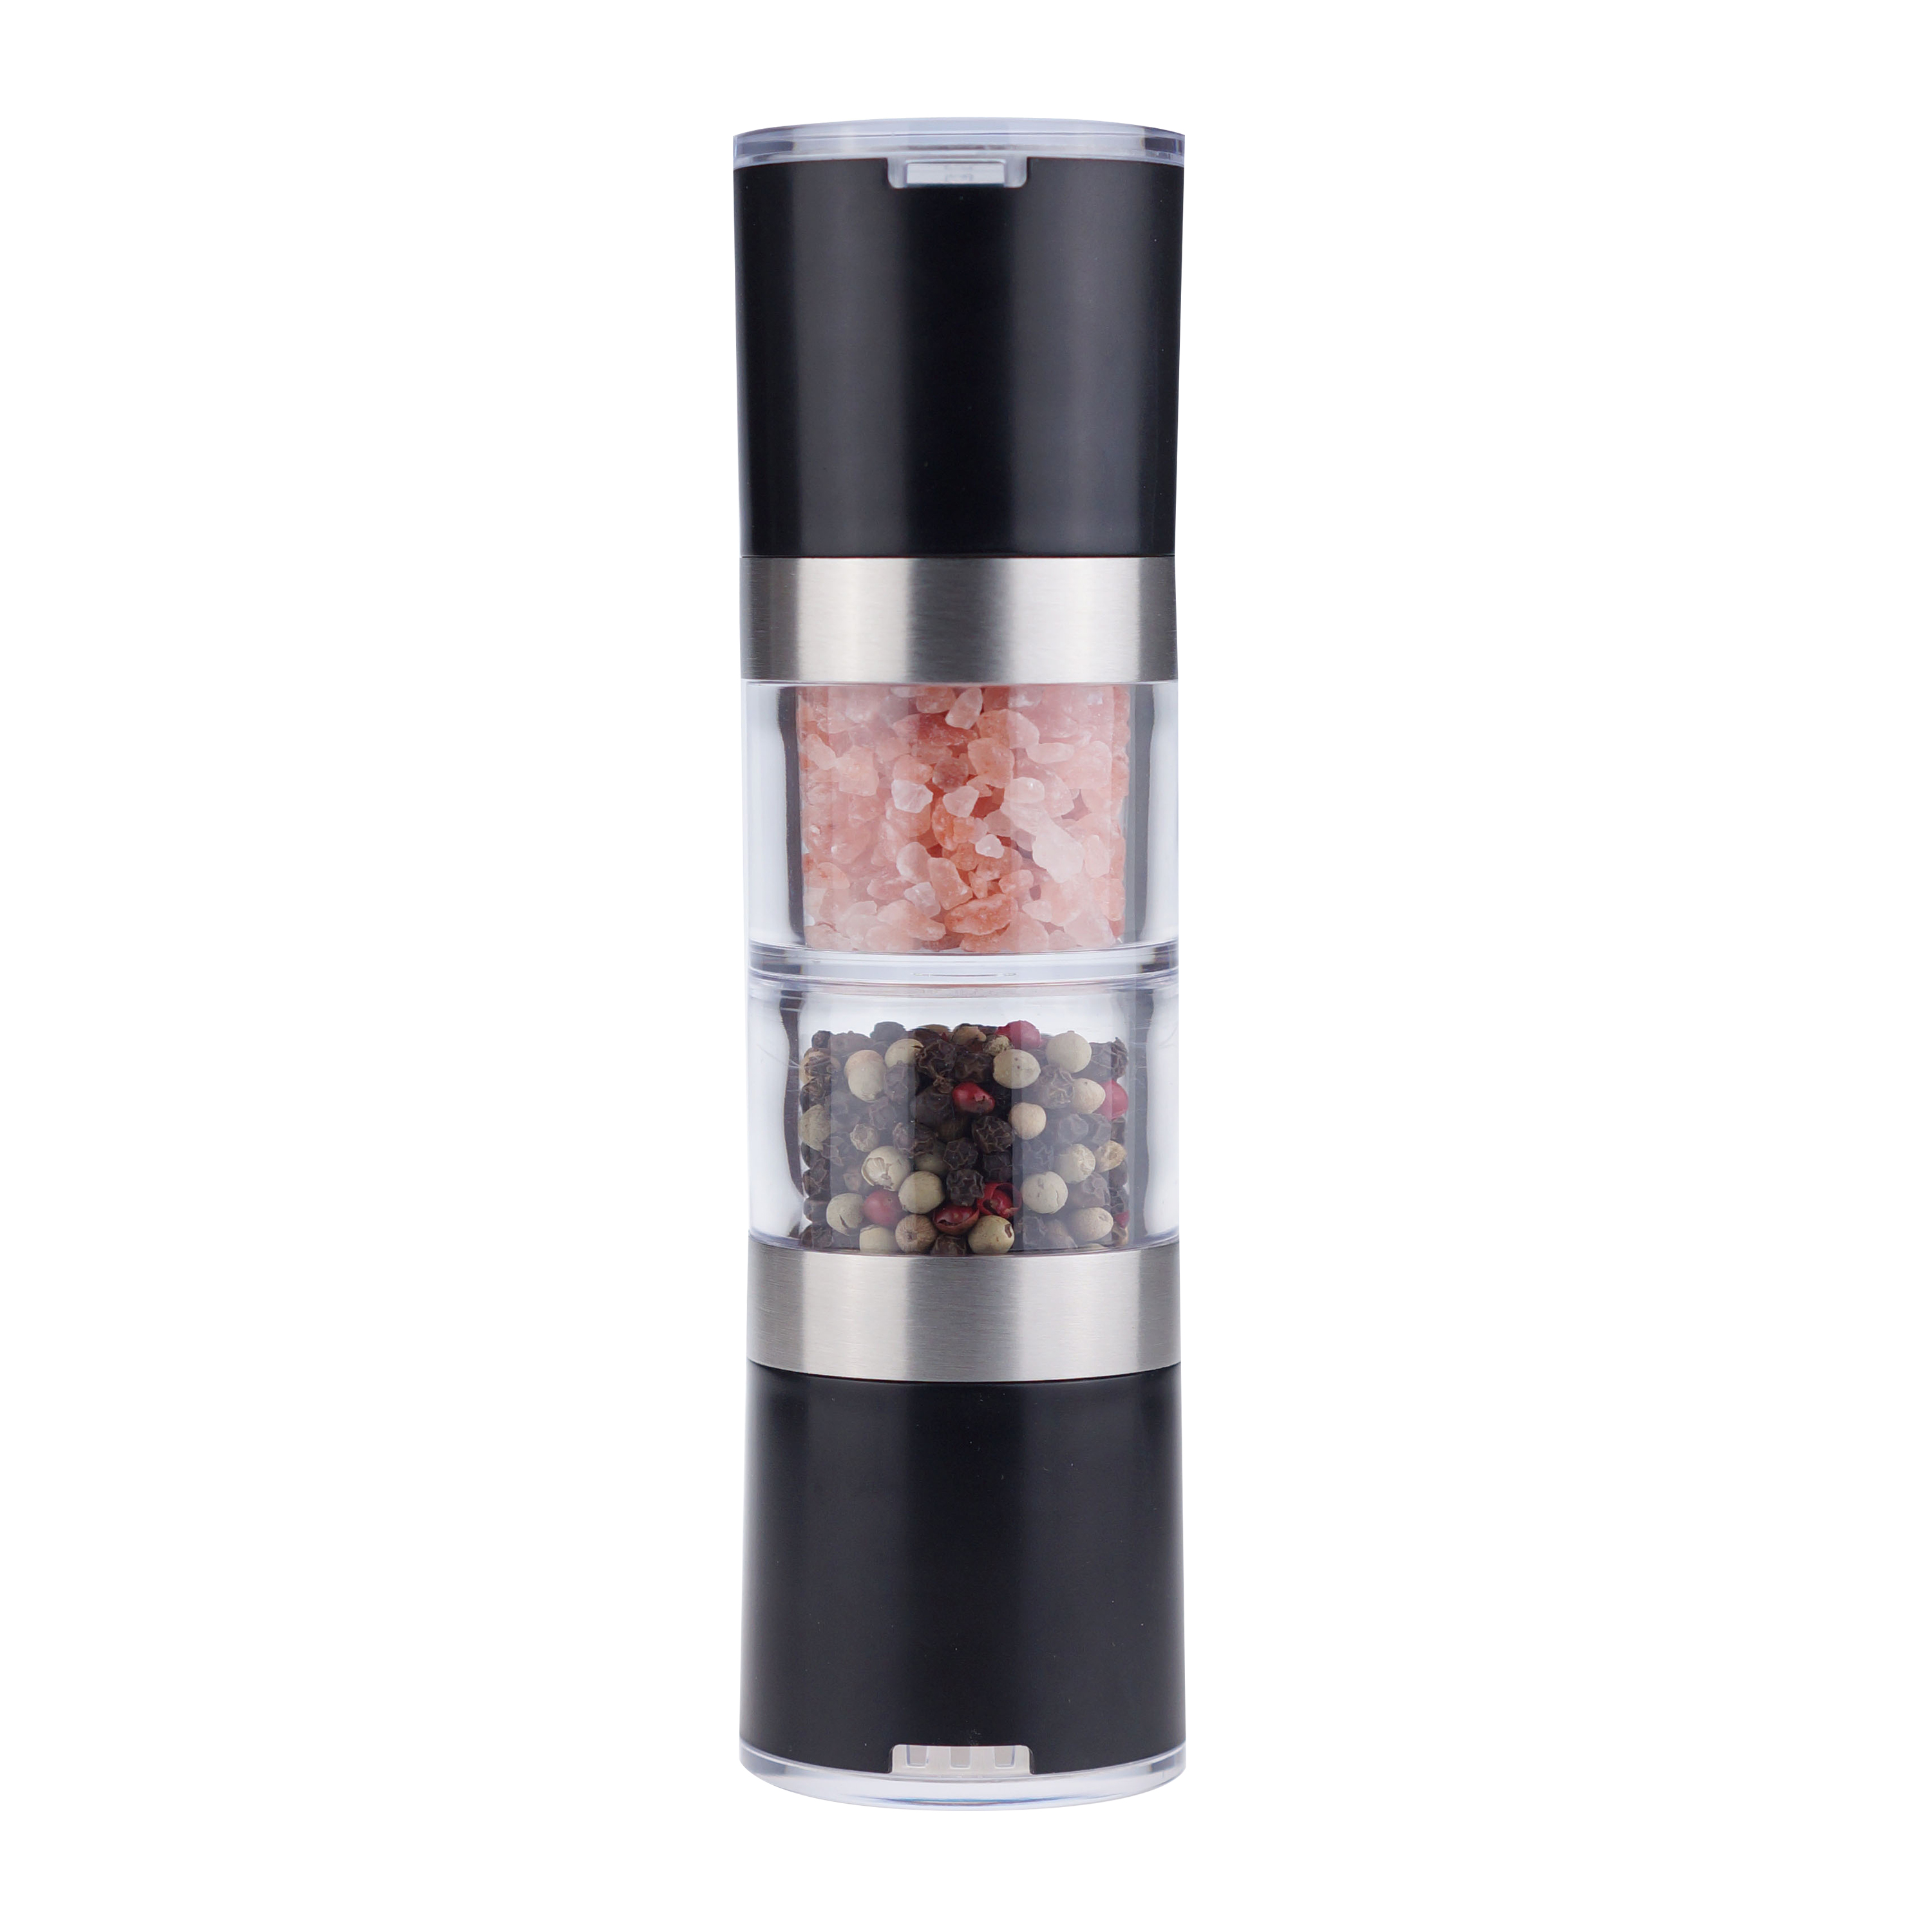 2 in 1 salt and pepper mill